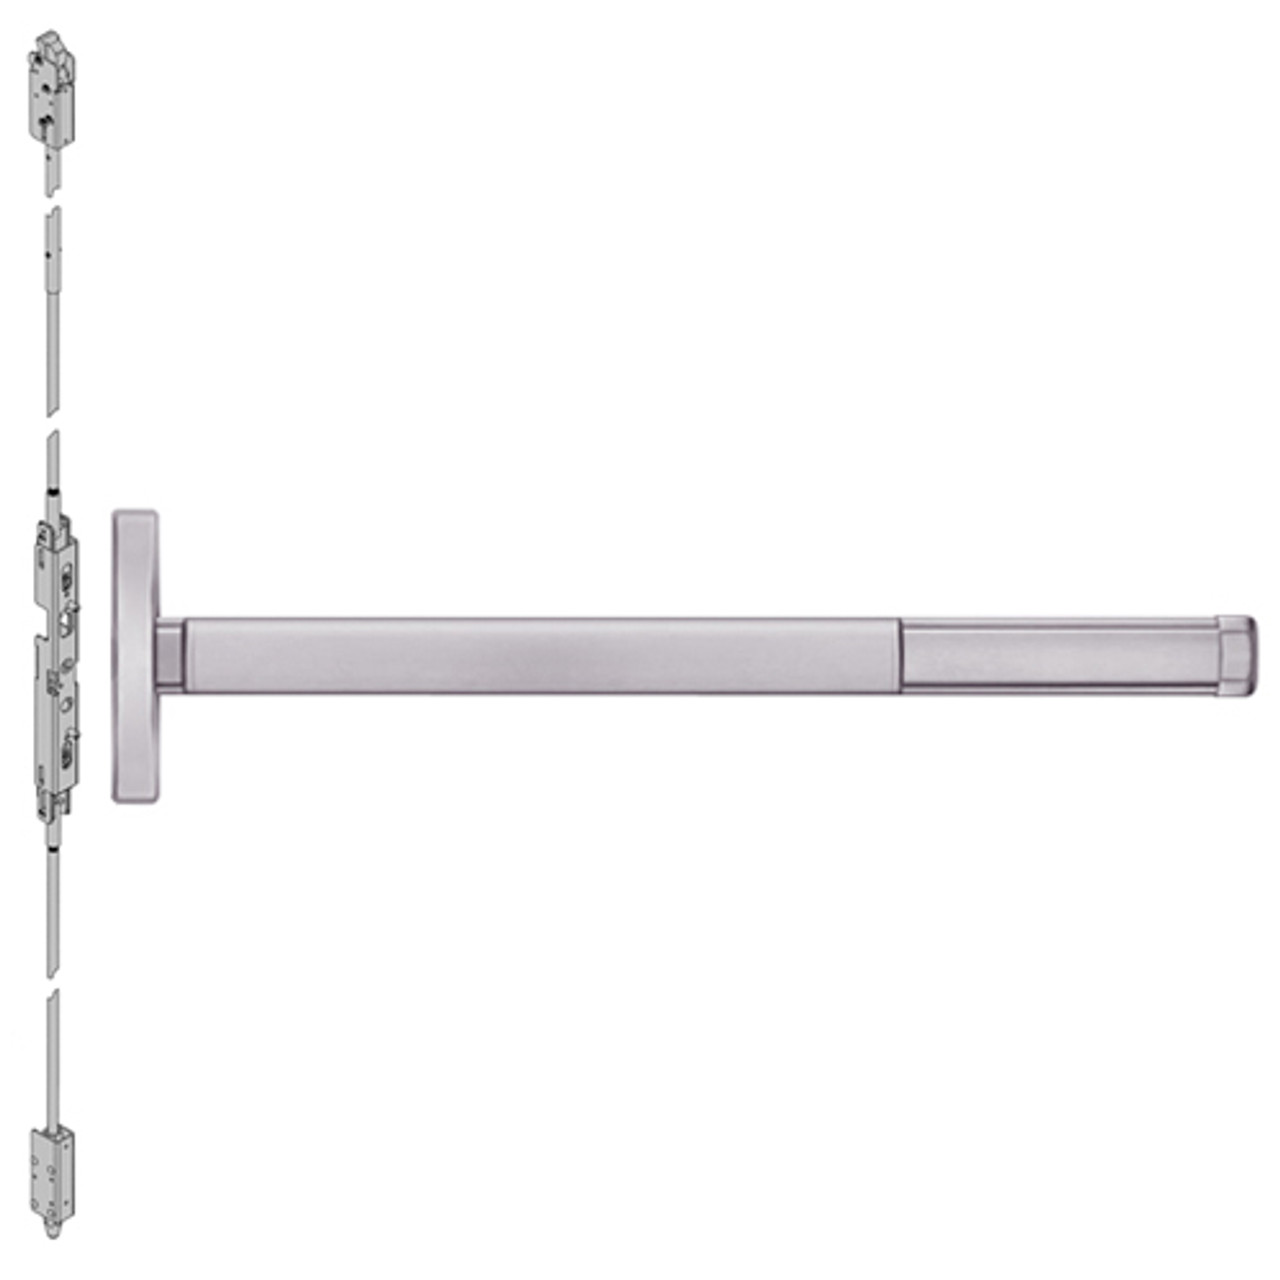 DE2602-630-48 PHI 2600 Series Concealed Vertical Rod Exit Device with Delayed Egress Prepped for Dummy Trim in Satin Stainless Steel Finish